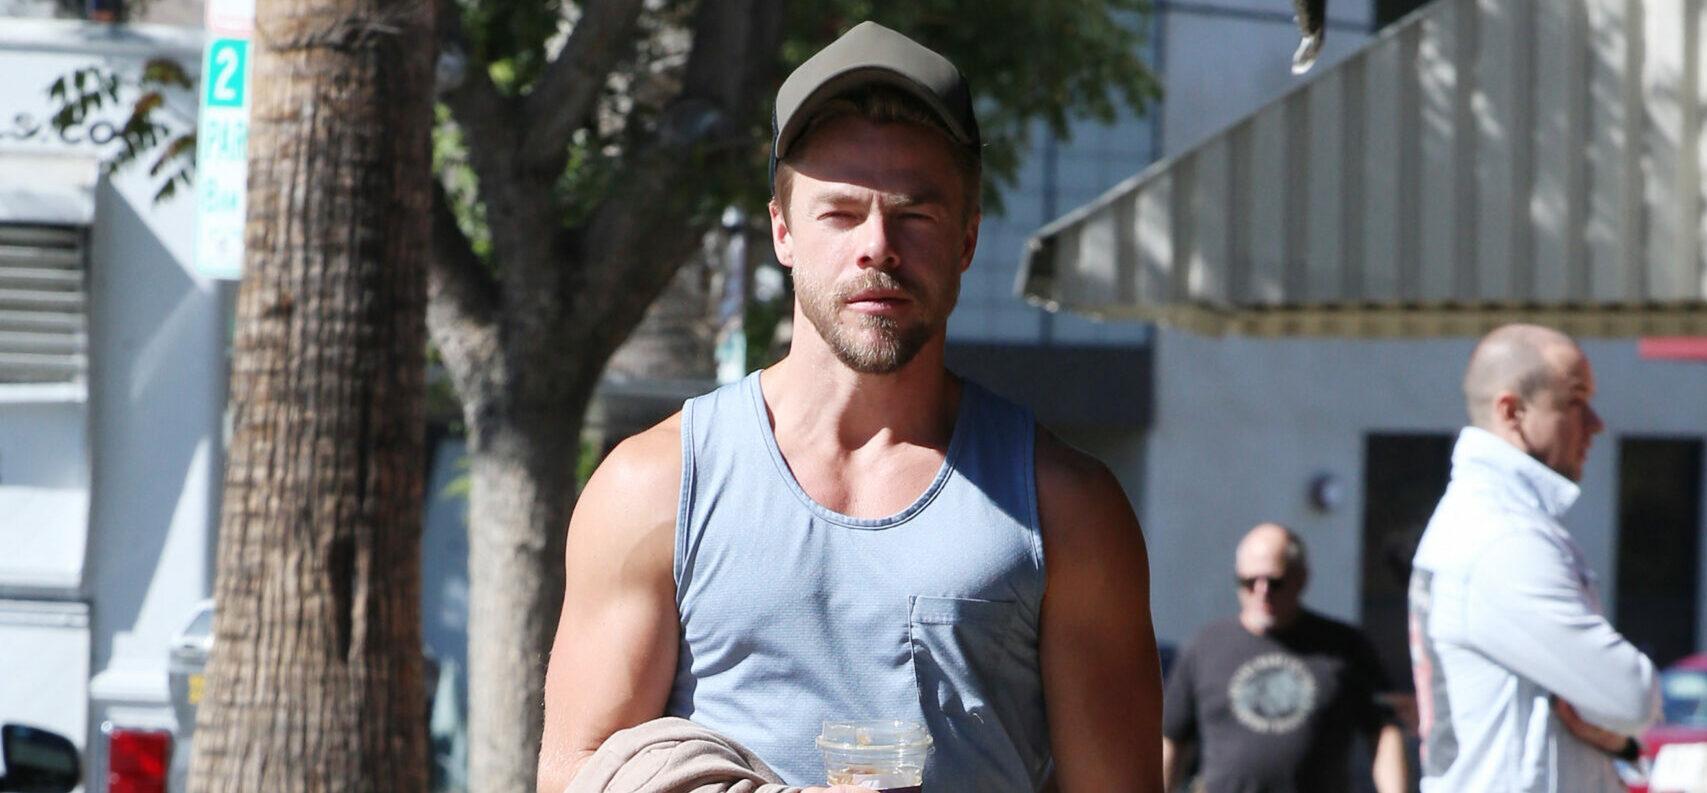 Derek Hough all smiles after finishing breakfast at Alfred coffee Saturday morning